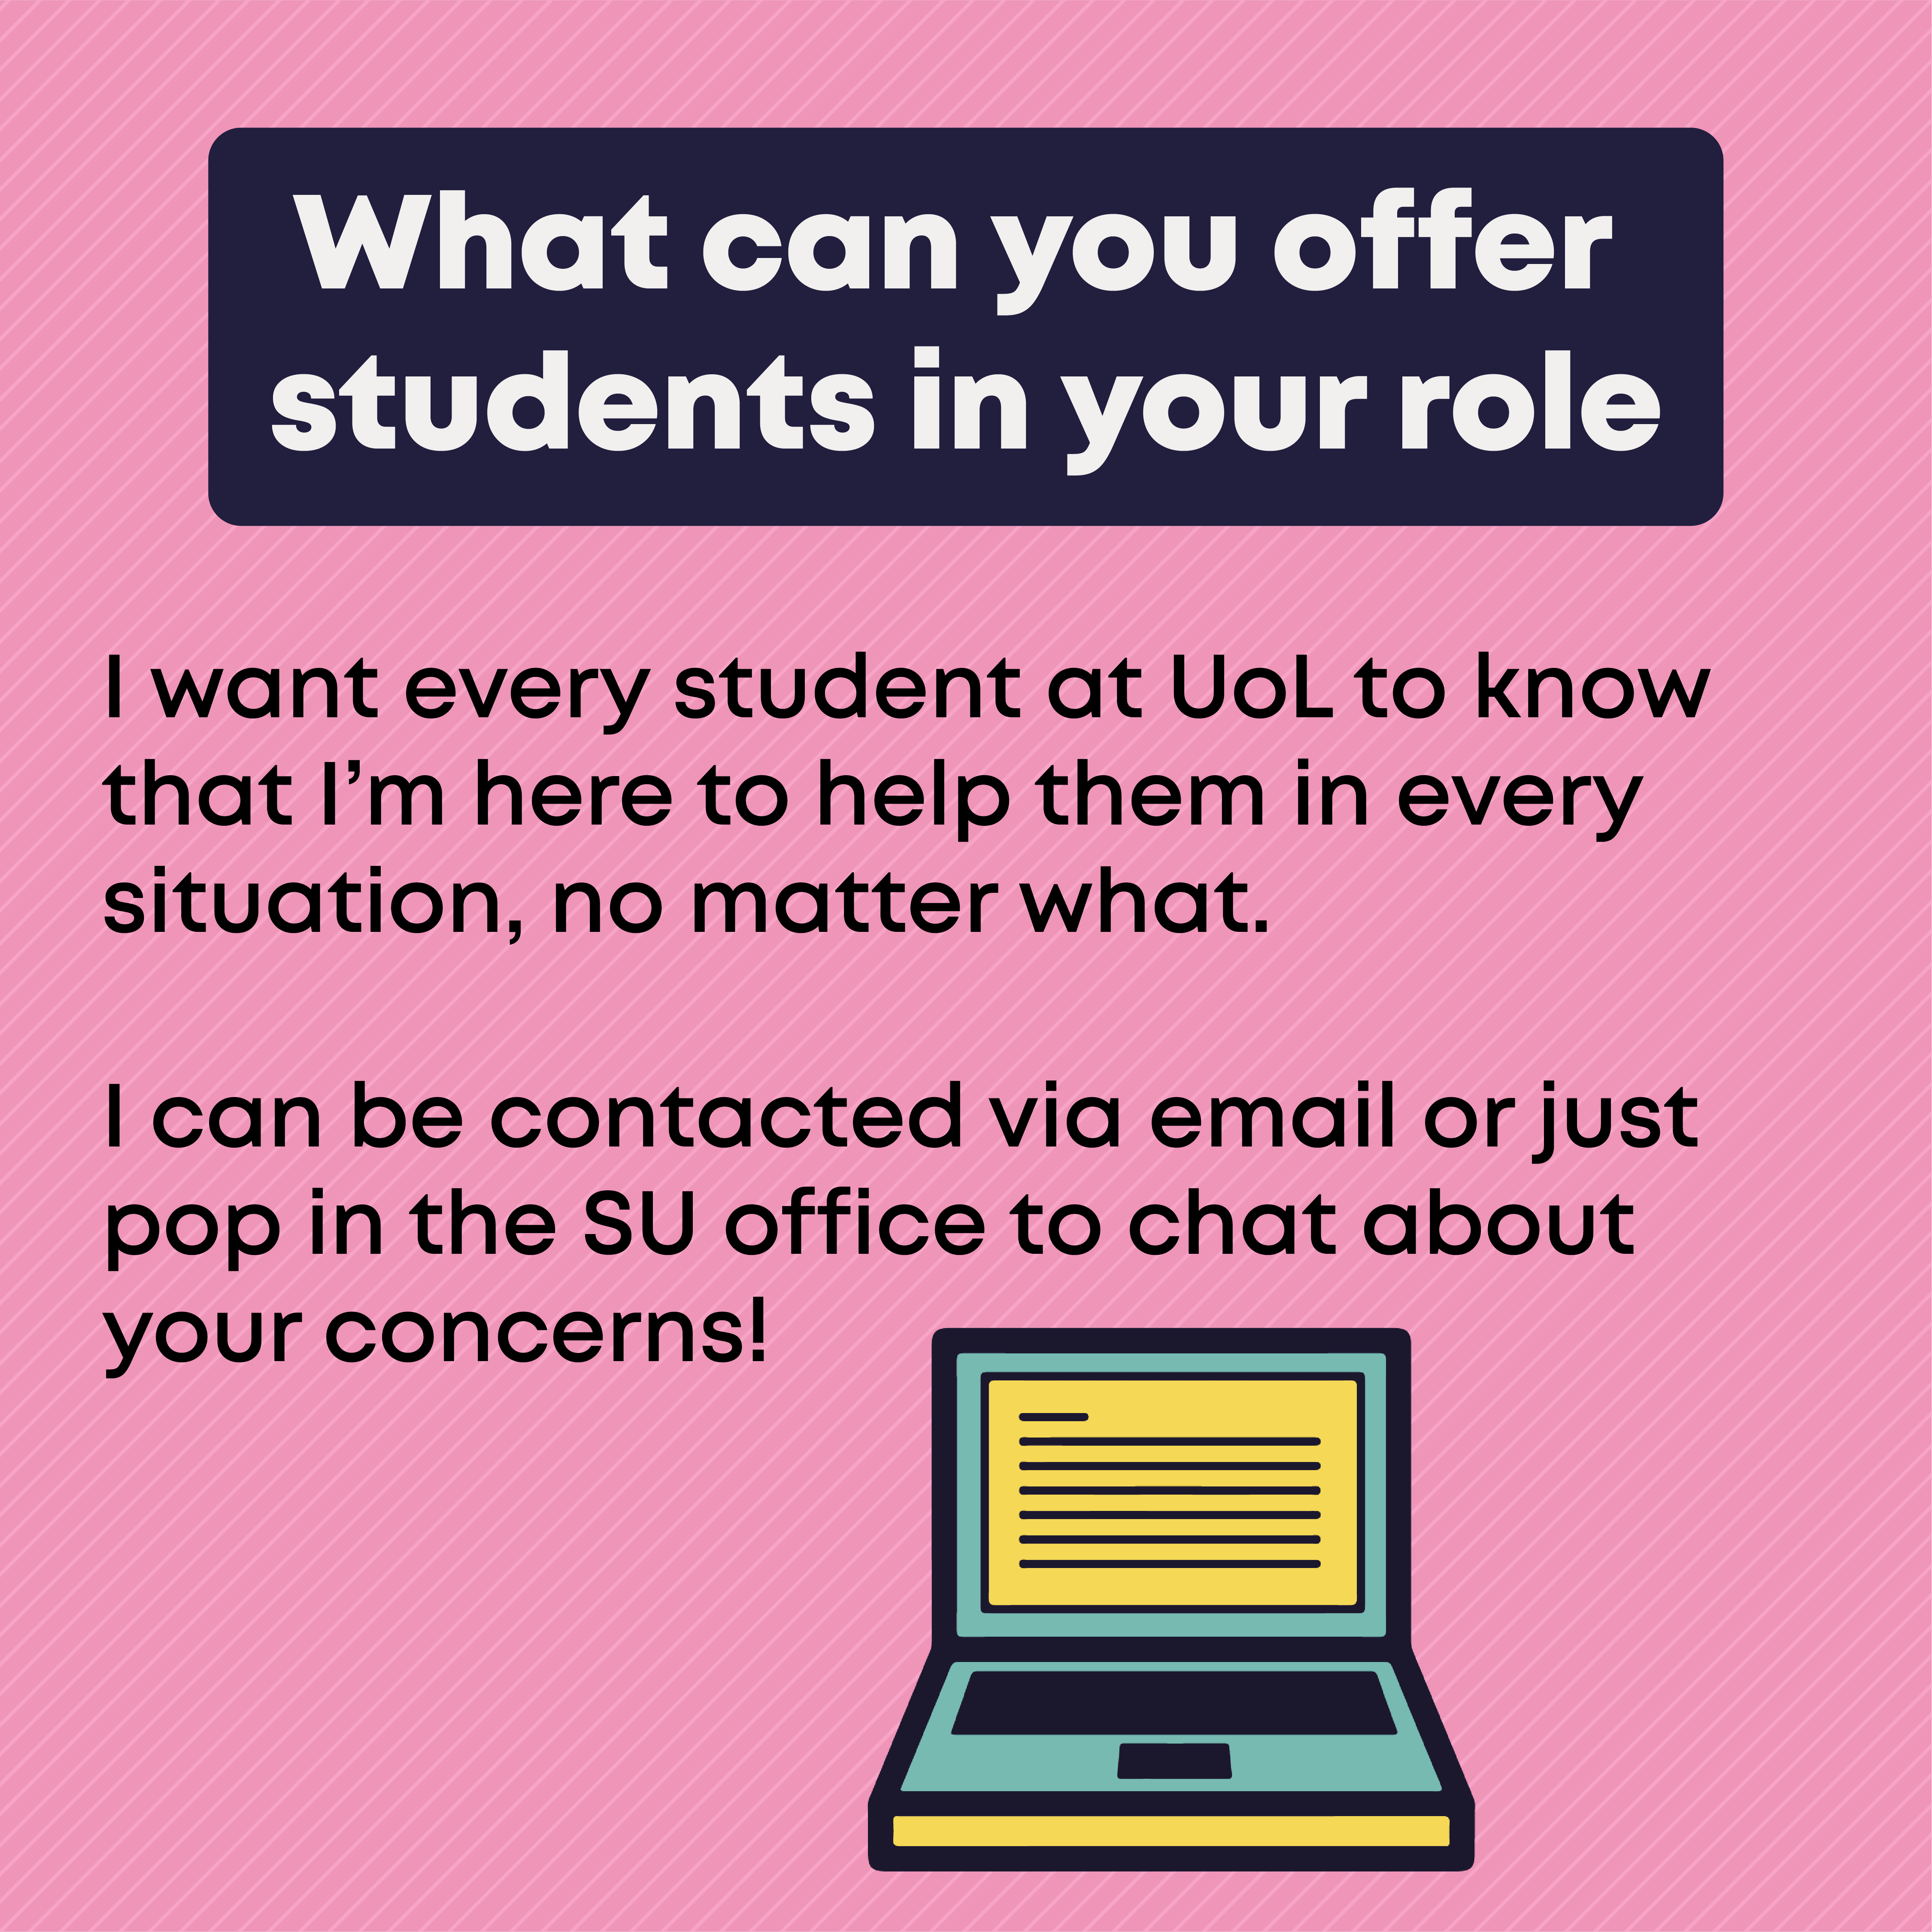 What can you offer students in your role?  I want every student at UoL to know that I’m here to help them in every situation, no matter what.   I can be contacted via email or just pop in the SU office to chat about your concerns! 